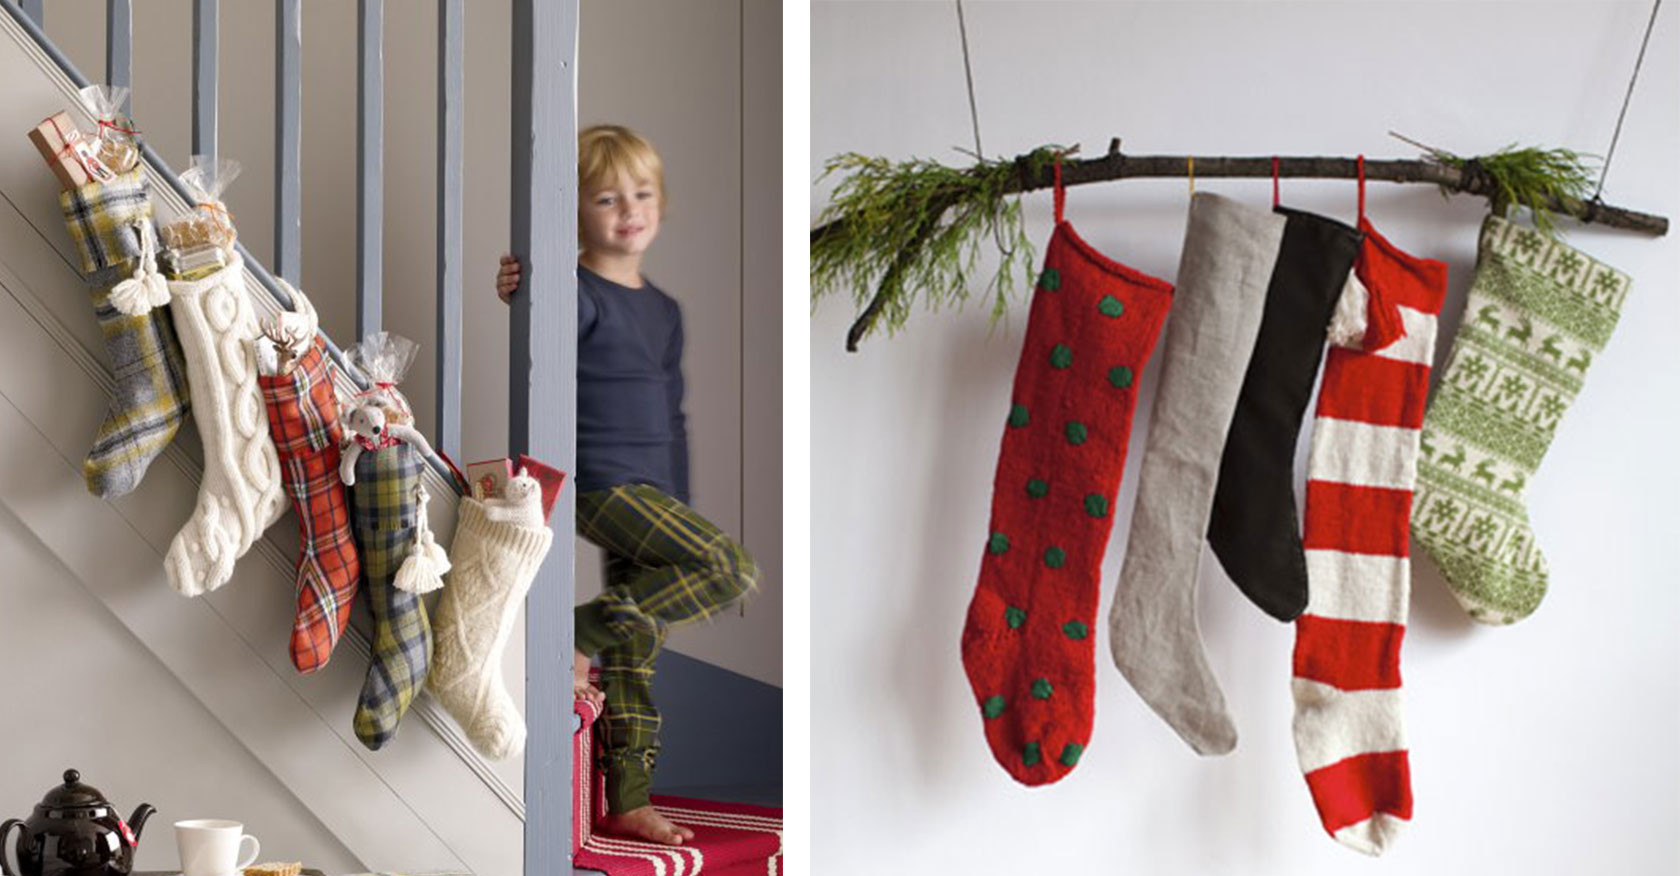 Hanging Christmas Stockings Without Fireplace
 Alternative Mantle Ideas for Holiday Decorating